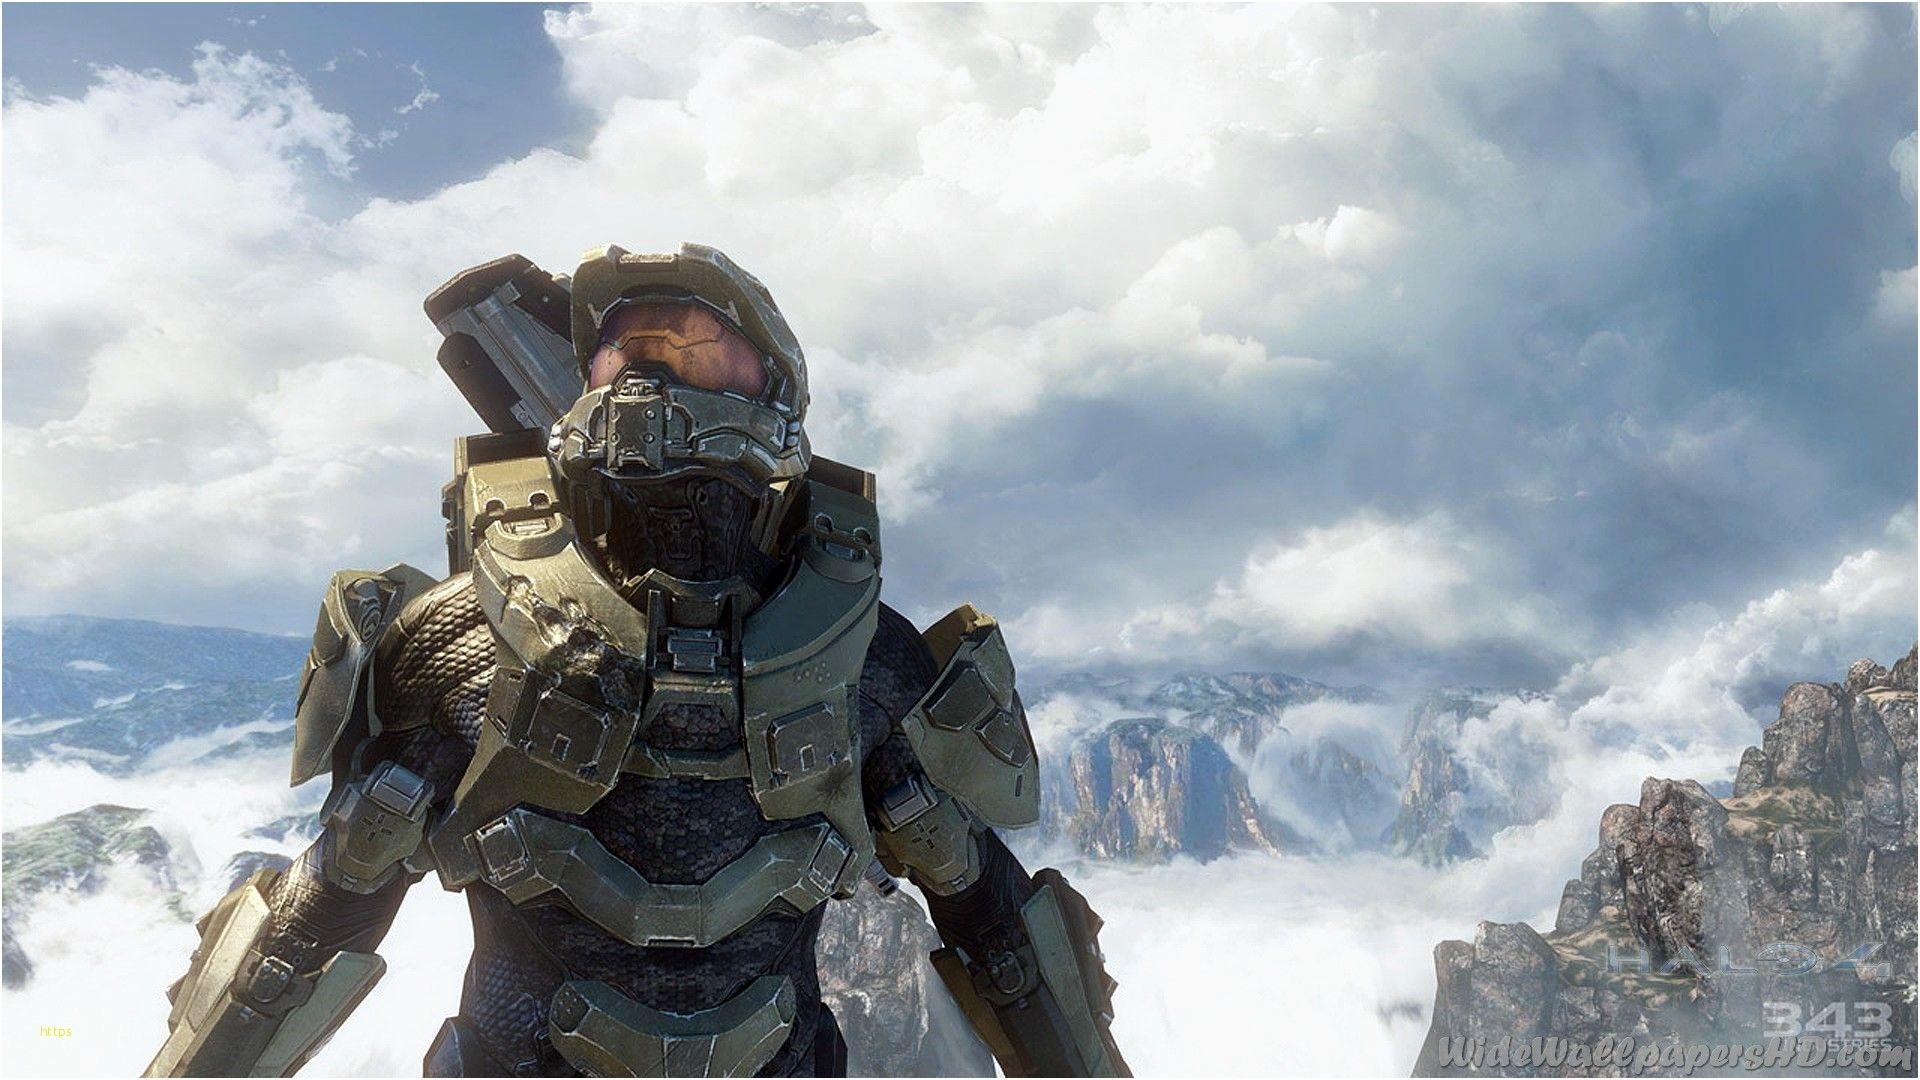 1920x1080 ... Master Chief Wallpaper Lovely Master Chief Wallpapers Hd Wallpaper Cave  ...